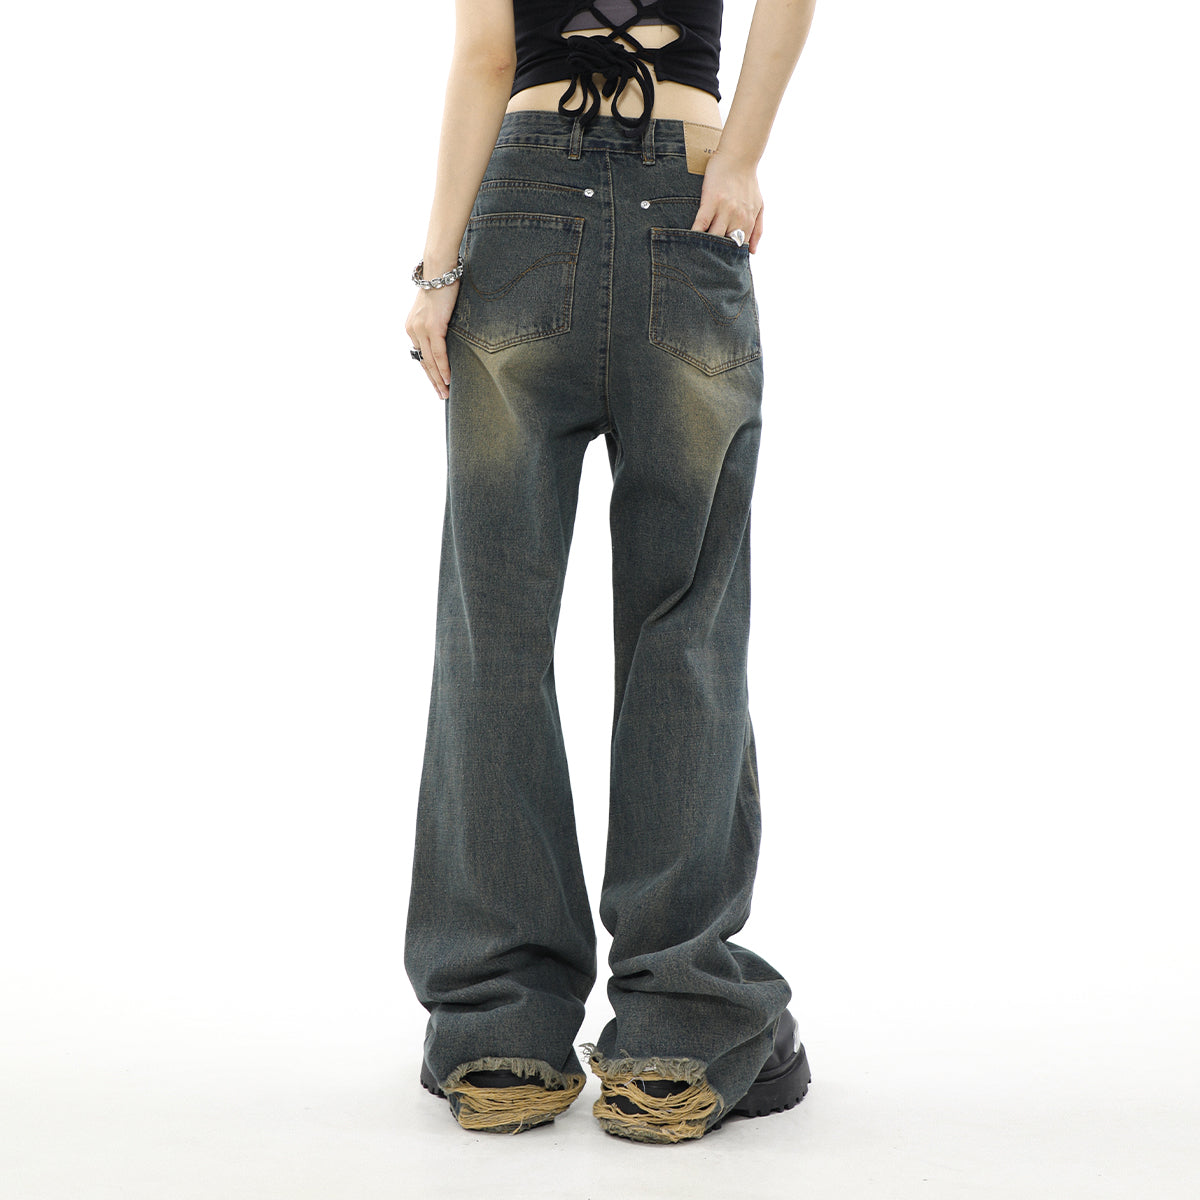 Mr Nearly Distressed Buttons Flare Leg Jeans Korean Street Fashion Jeans By Mr Nearly Shop Online at OH Vault